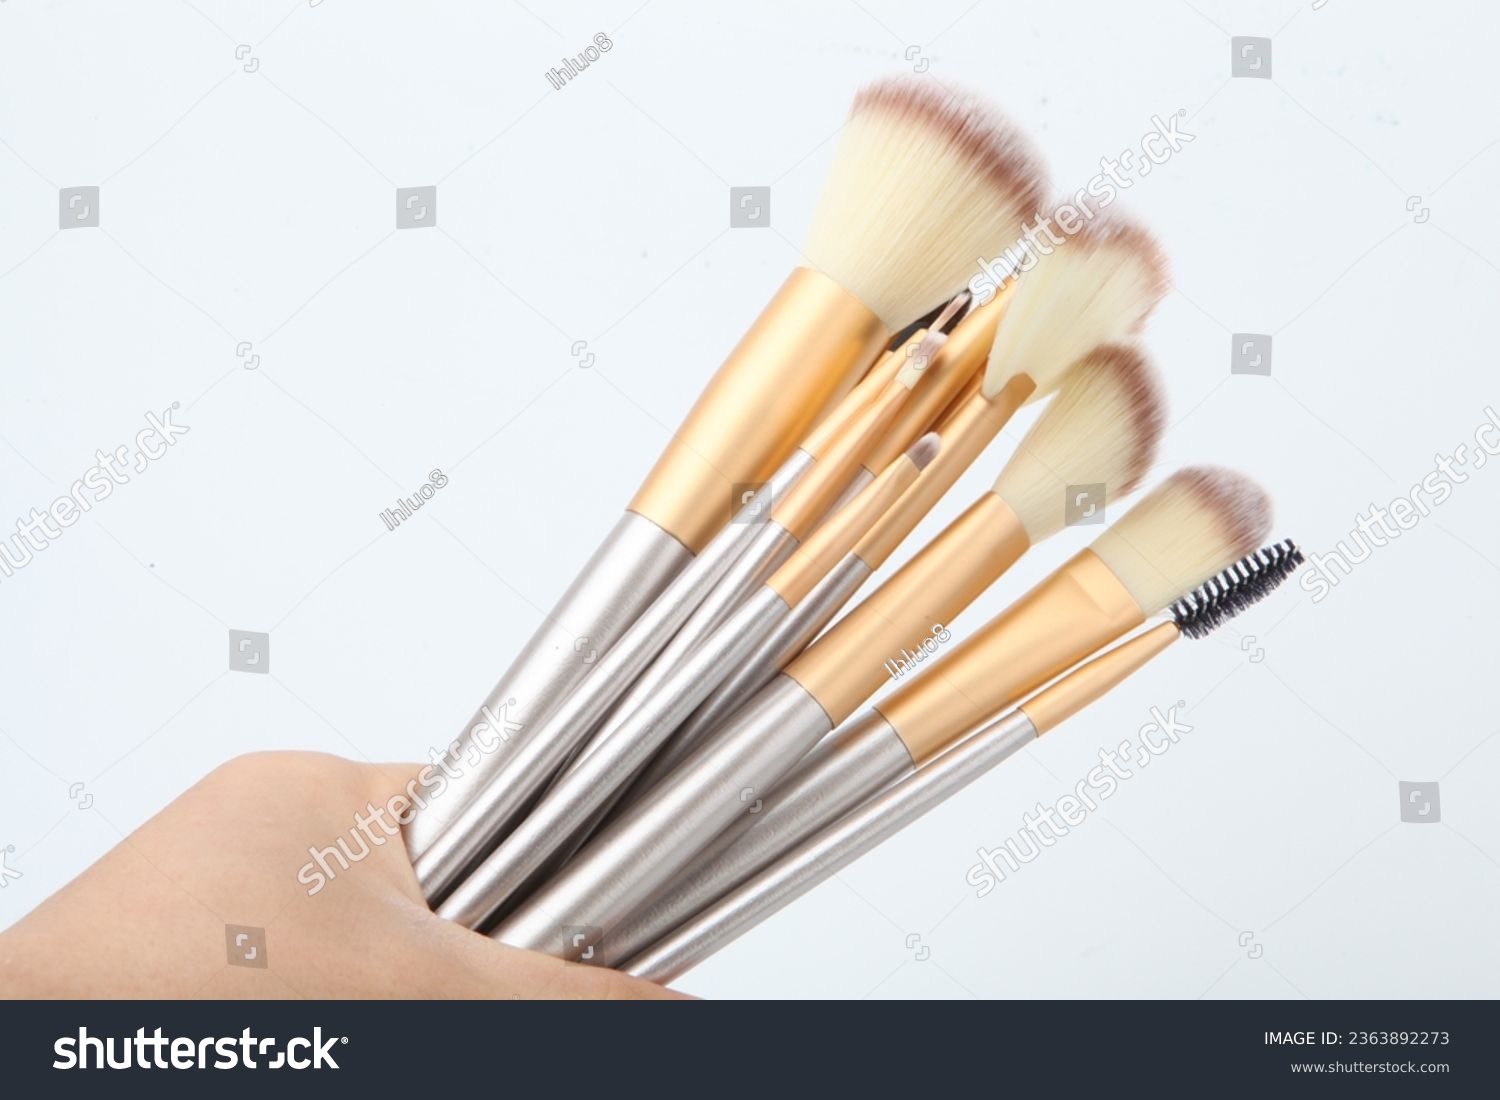 Makeup brushes
Cosmetic applicators
Beauty tools
Brush set
Makeup artist essentials
Precision application
Cosmetic bristles
Foundation blending
Eye shadow brushes
Professional makeup brushes #2363892273